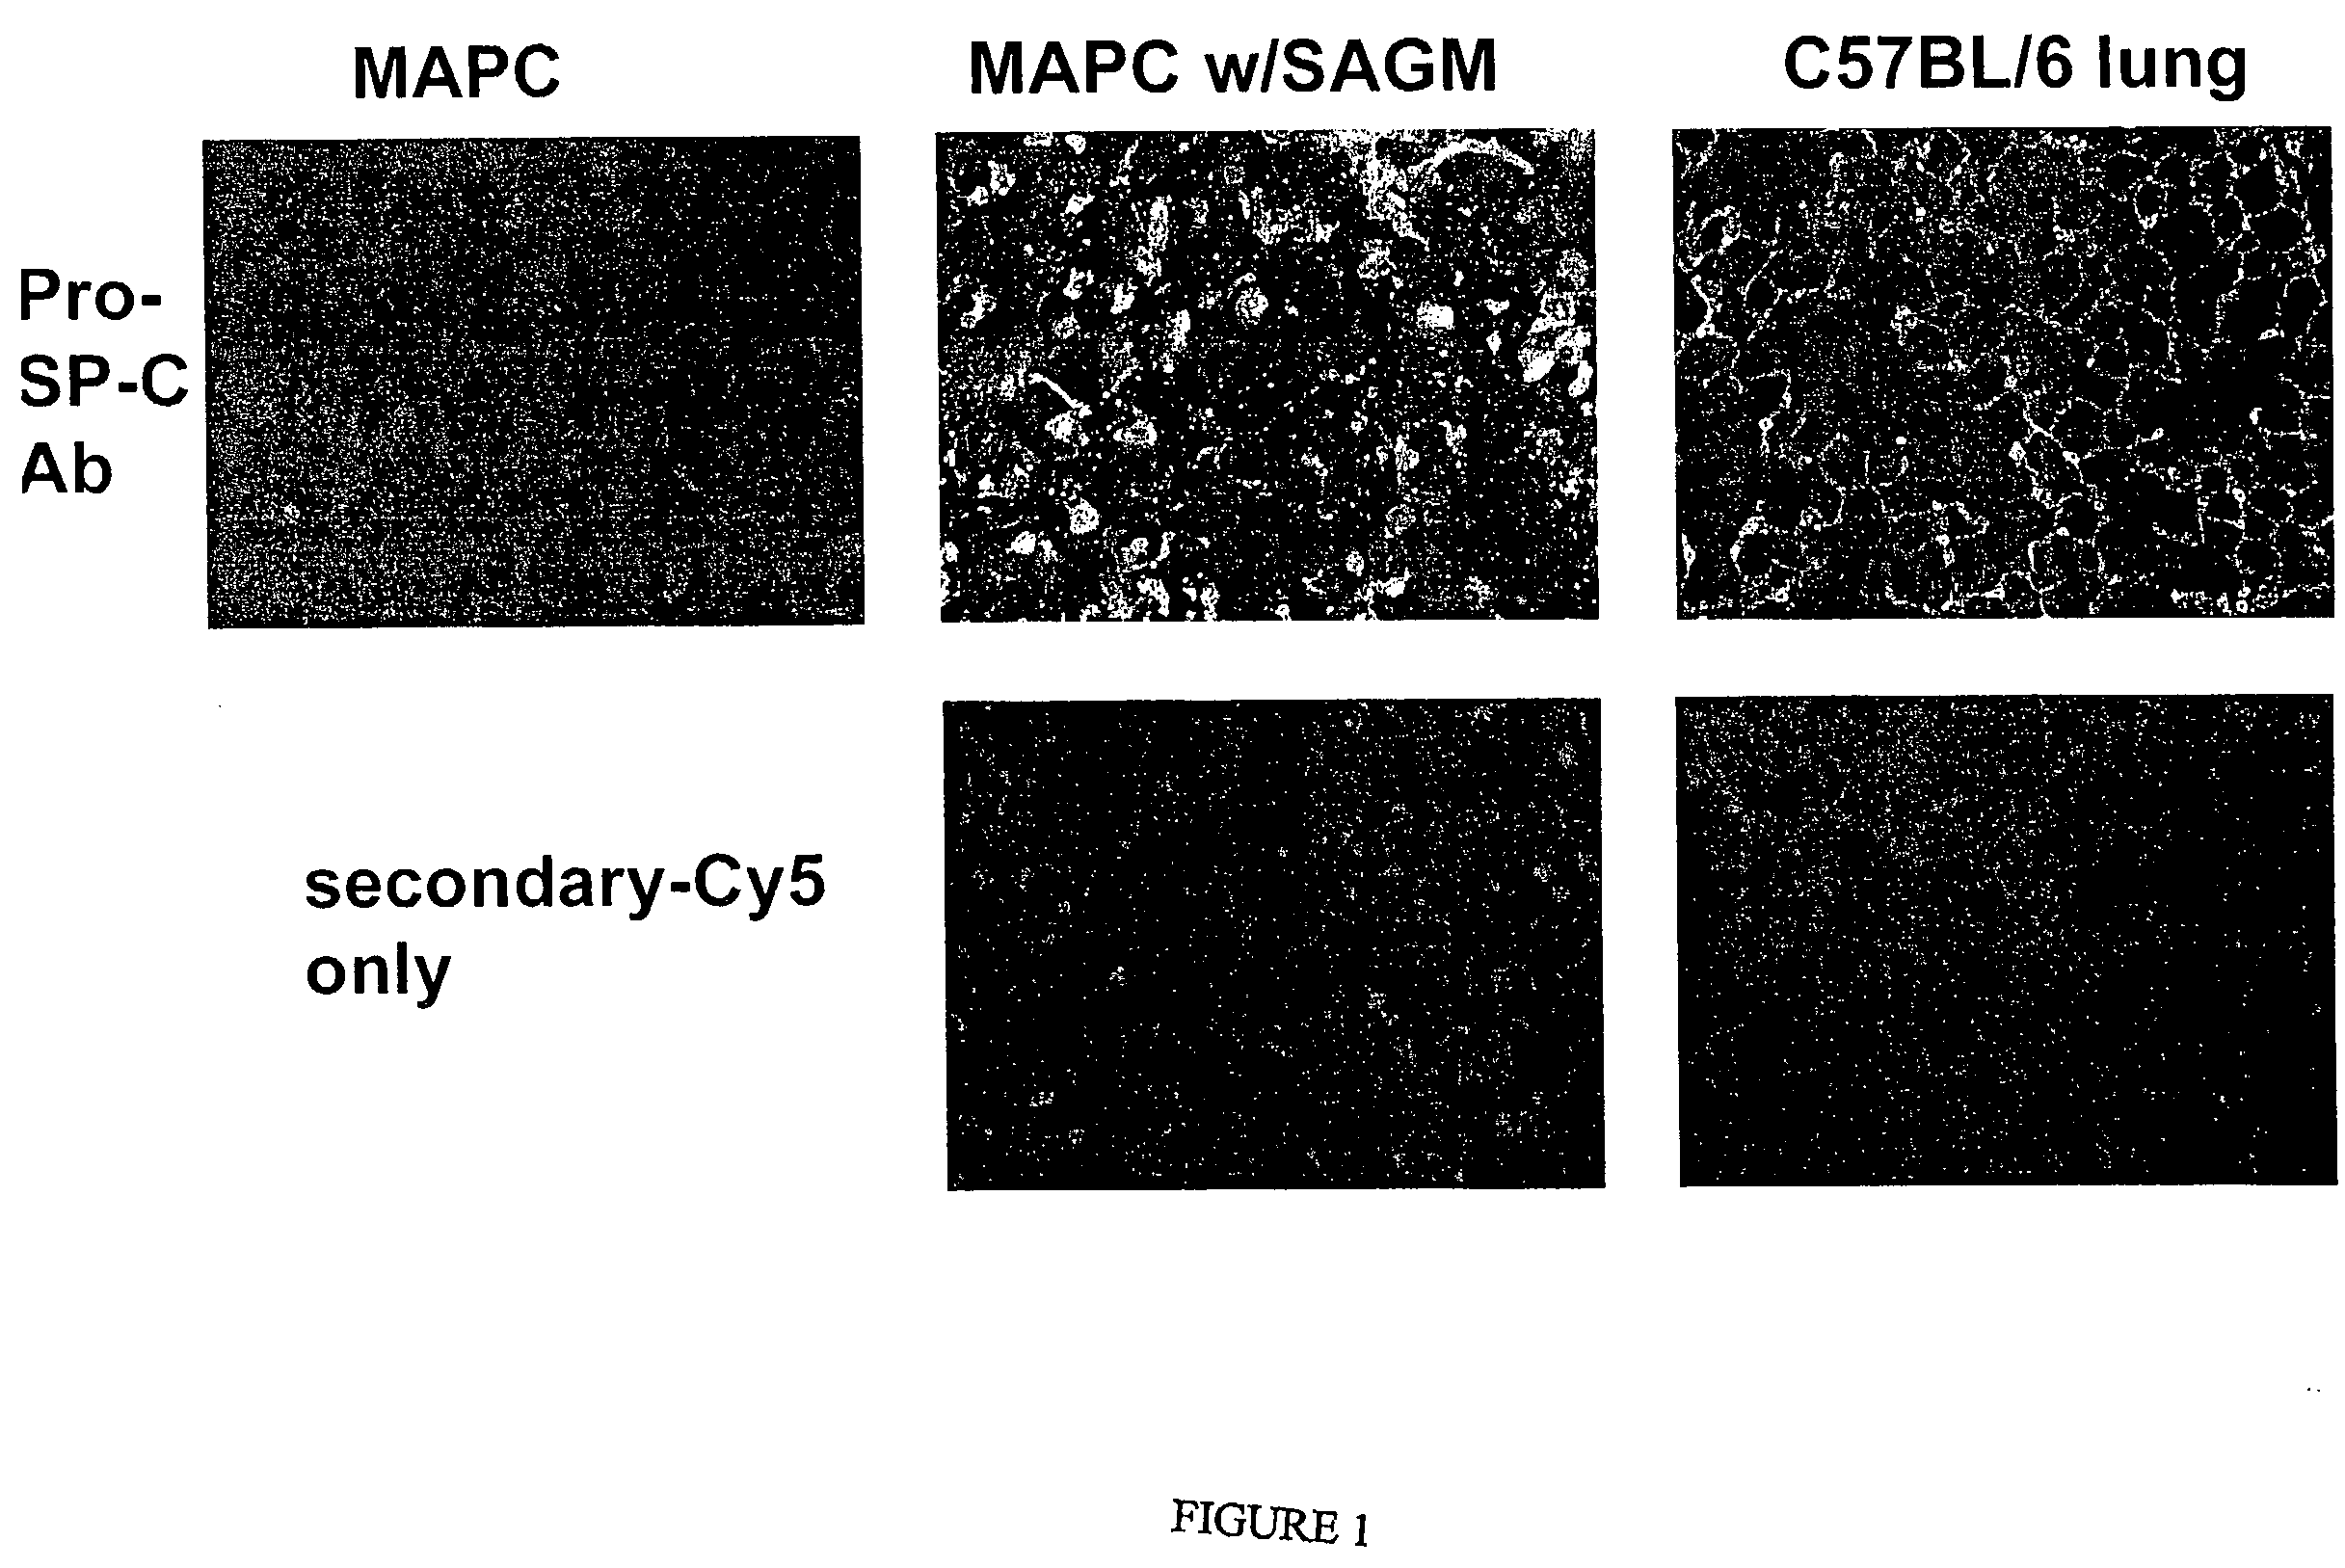 Mapc Generation of Lung Tissue